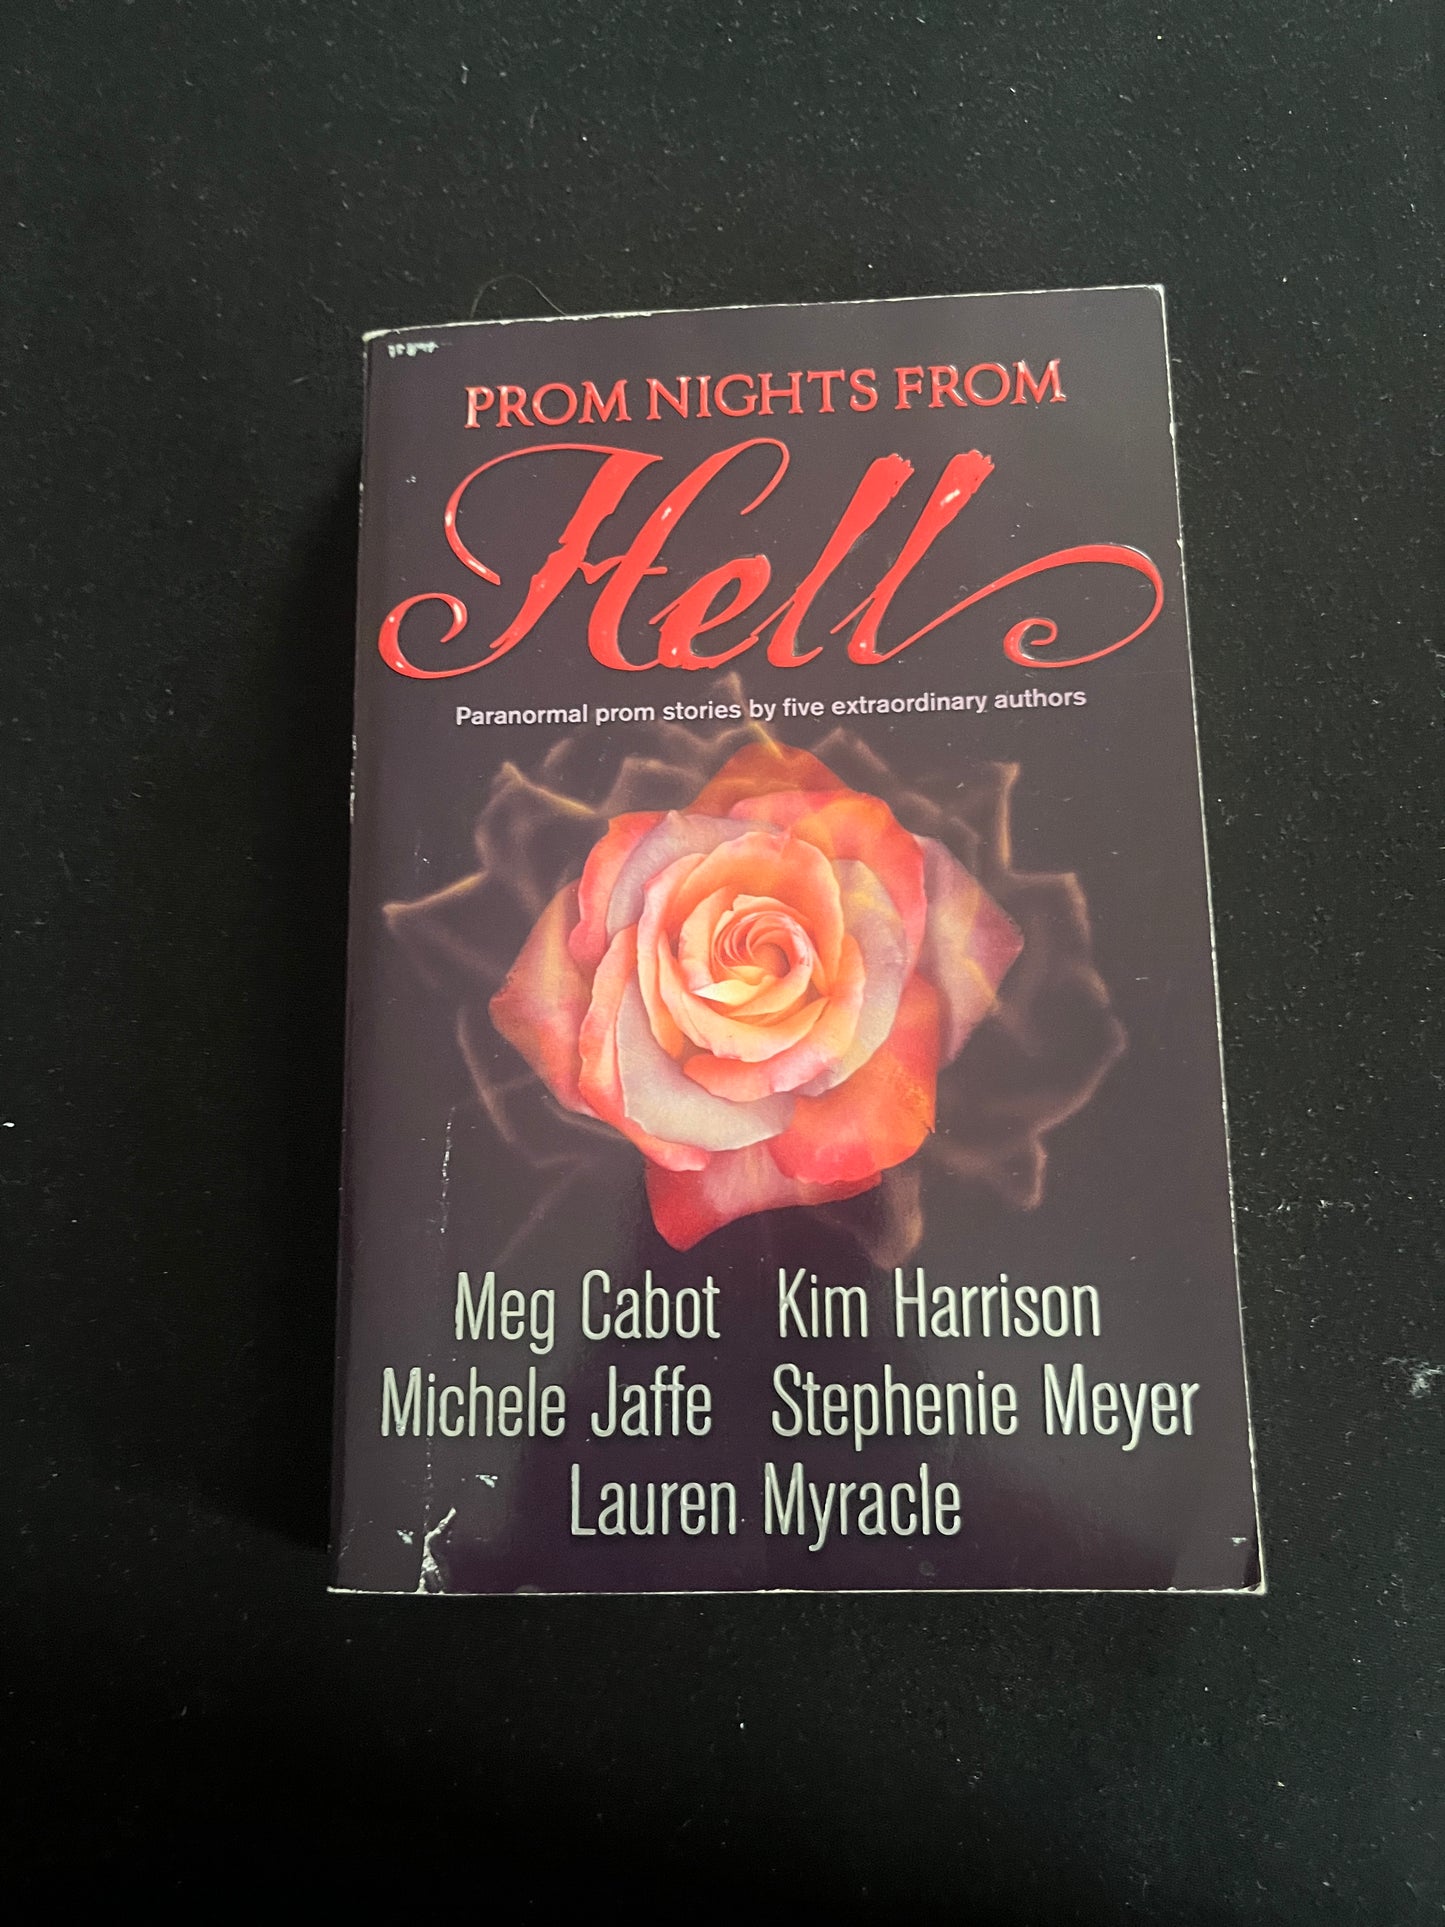 PROM NIGHTS FROM HELL by Various Authors